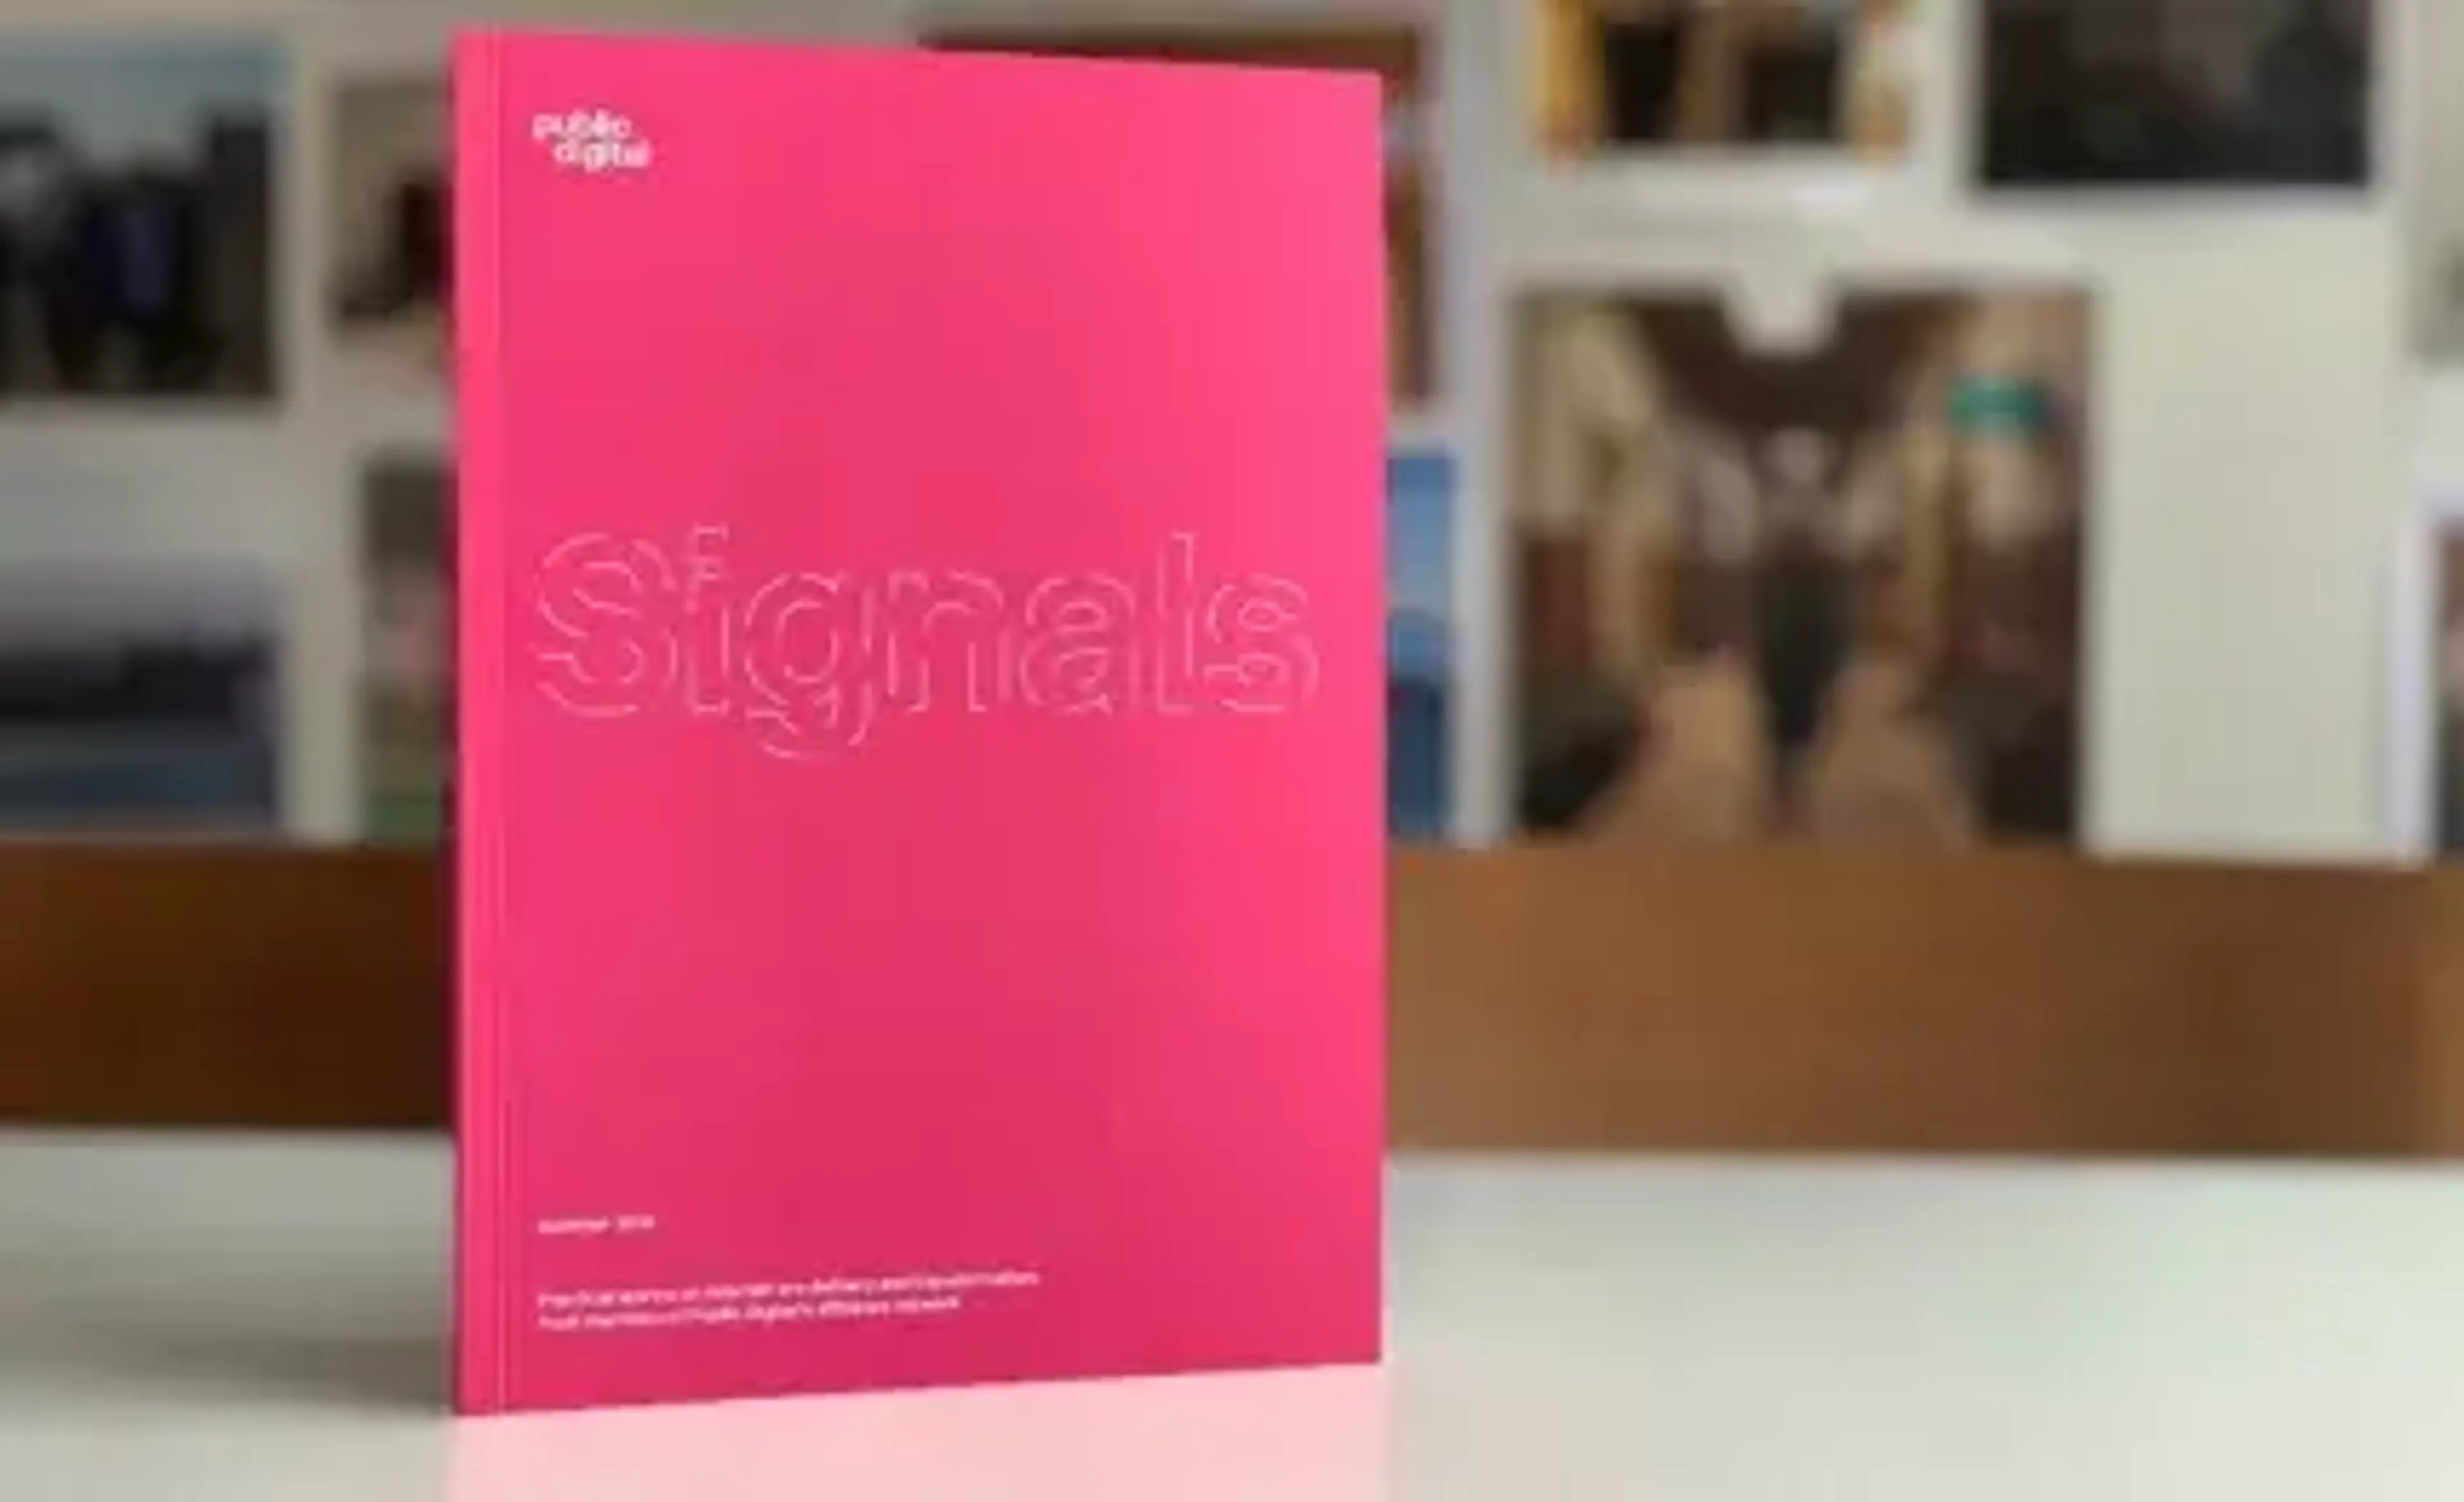 Signals book standing on table